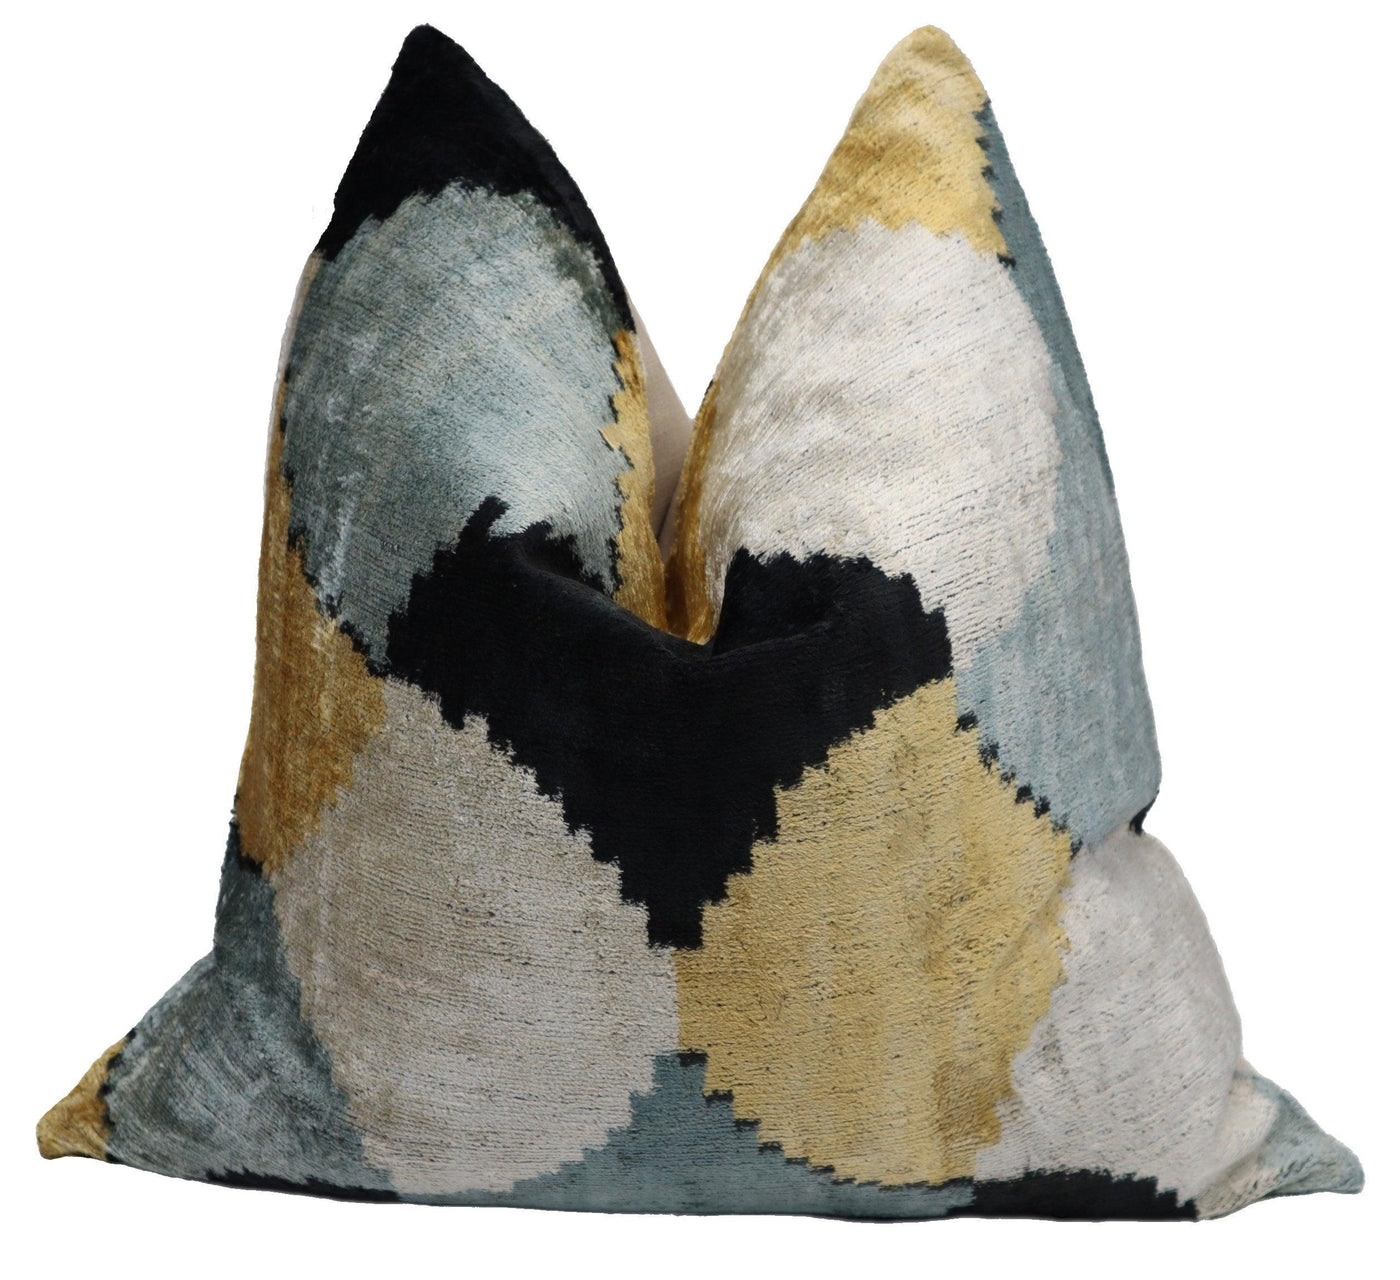 Canvello Hand Woven Multi Color Throw Pillows | 20 x 20 in (50 x 50 cm)